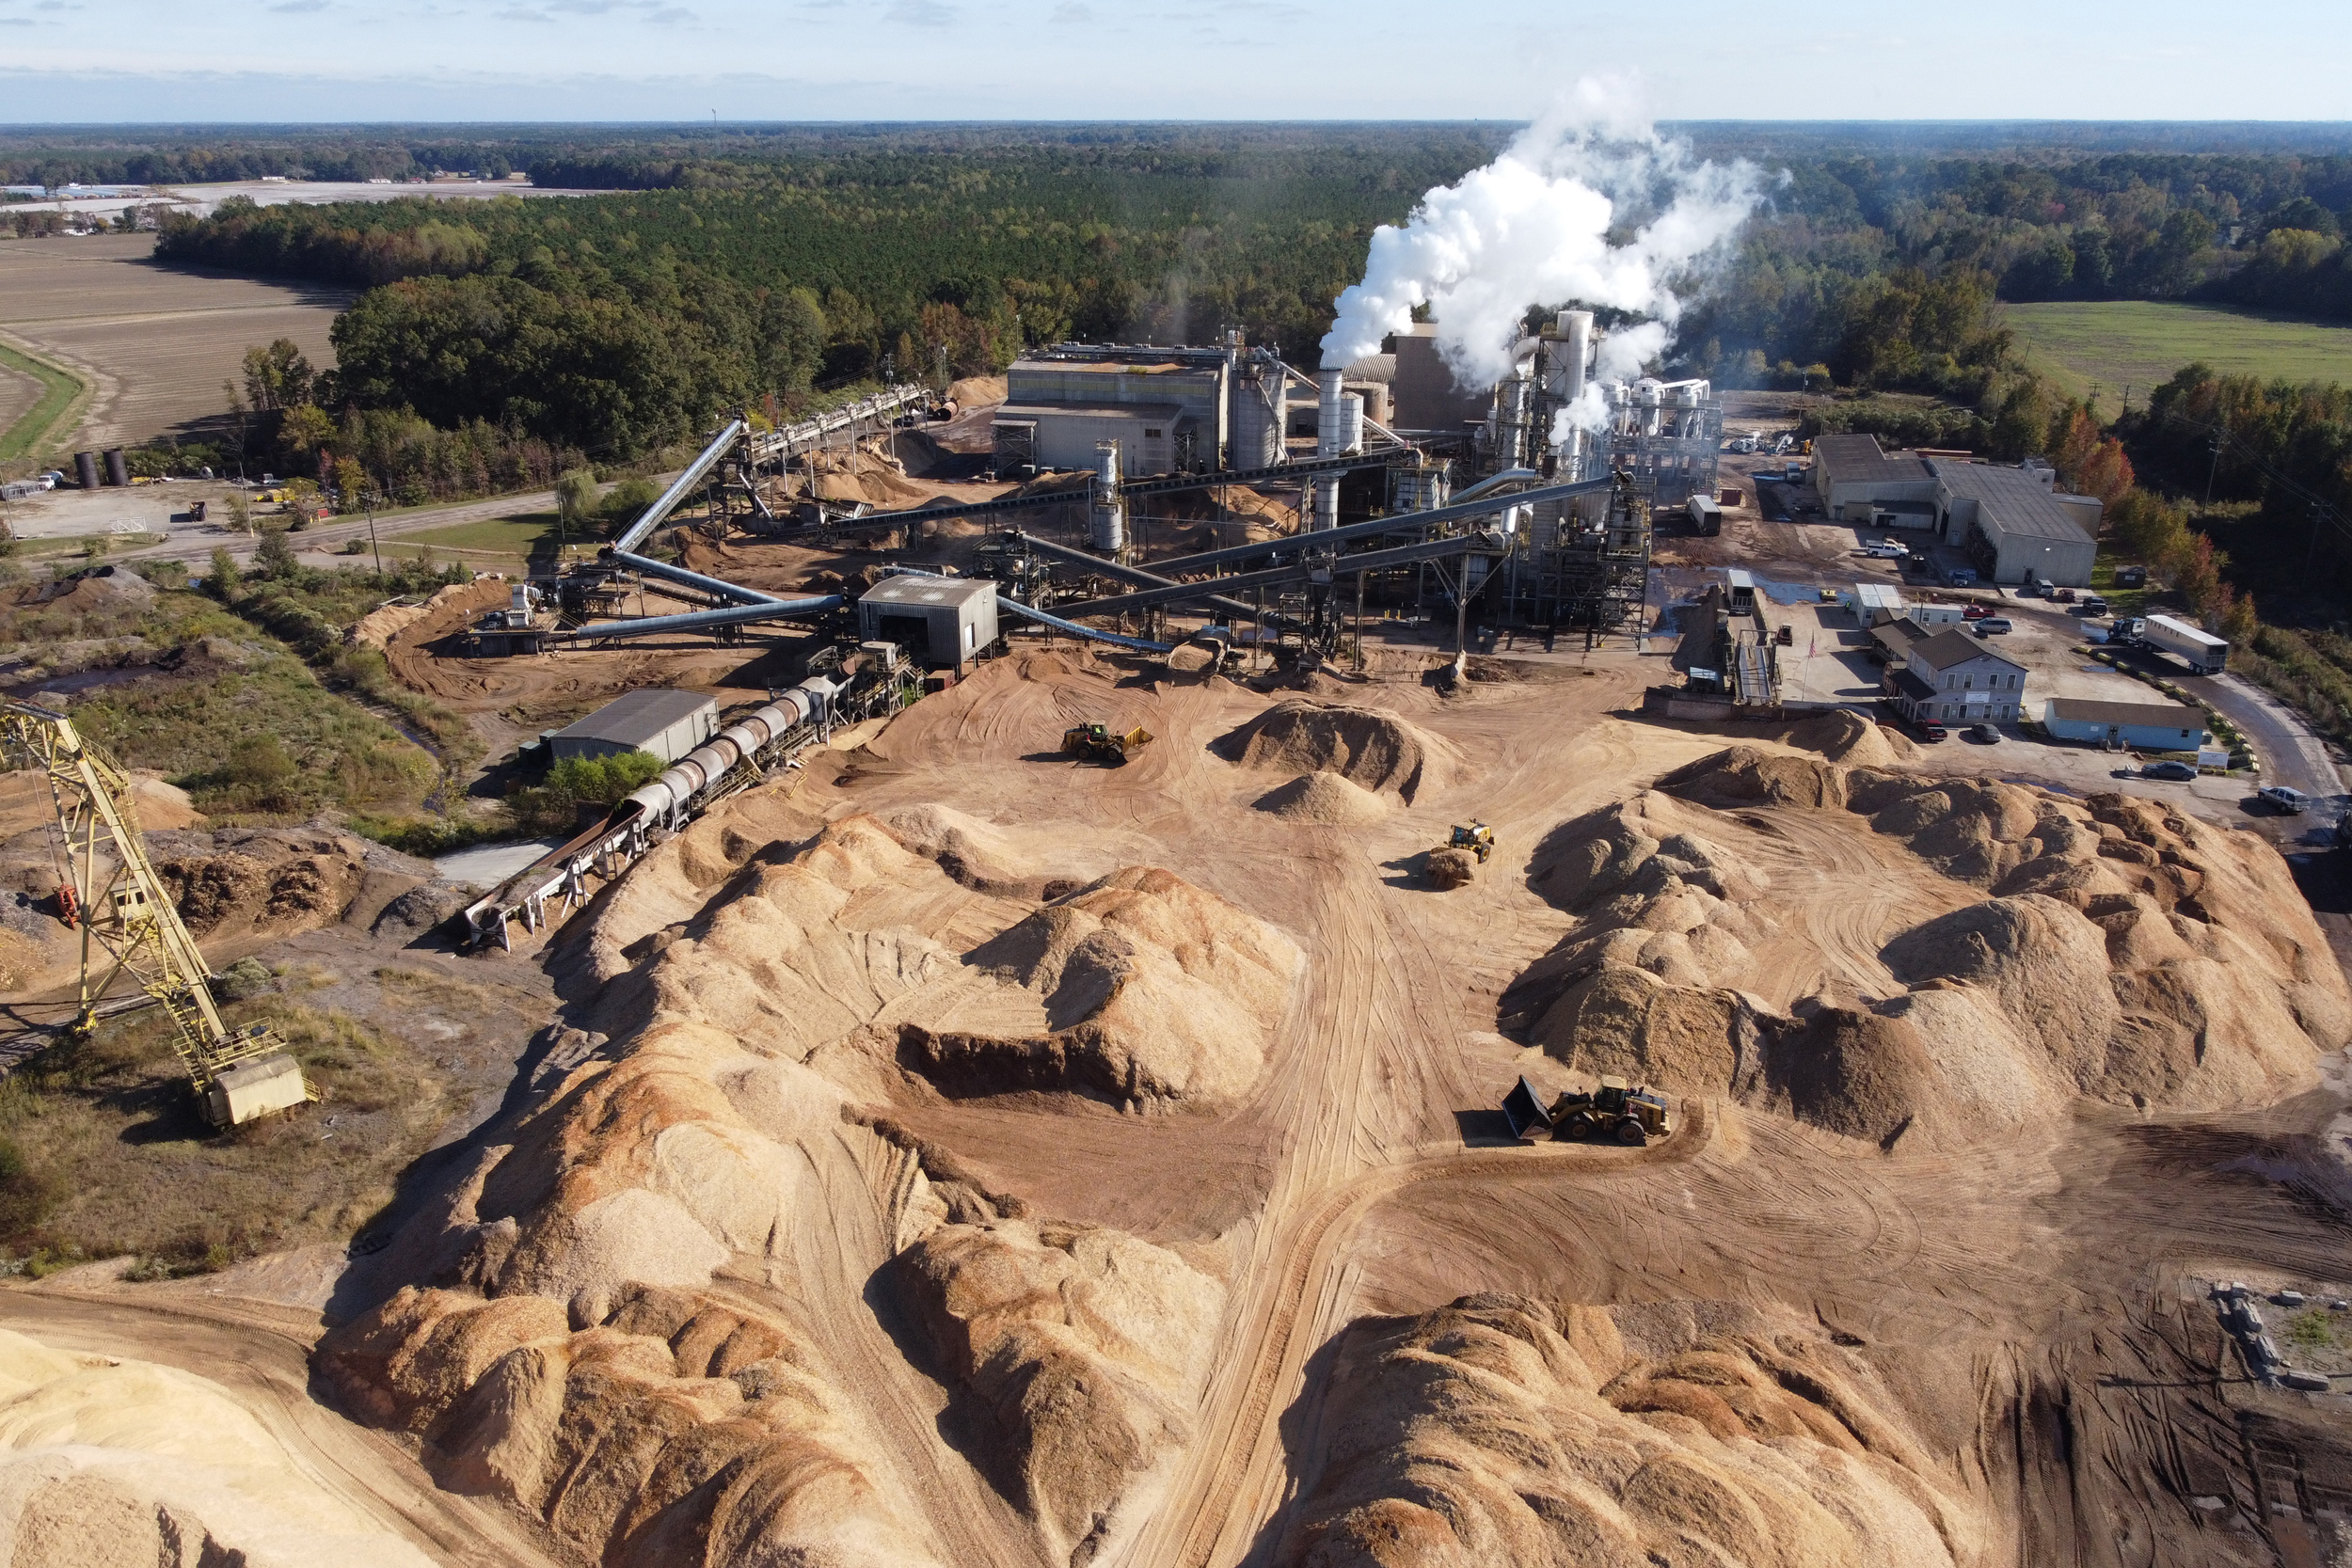 The Enviva Ahoskie mill in North Carolina has a production capacity of approximately 410,000 metric tons per year and operates 24 hours a day, seven days a week, according to the company. Credit: Tom Brennan